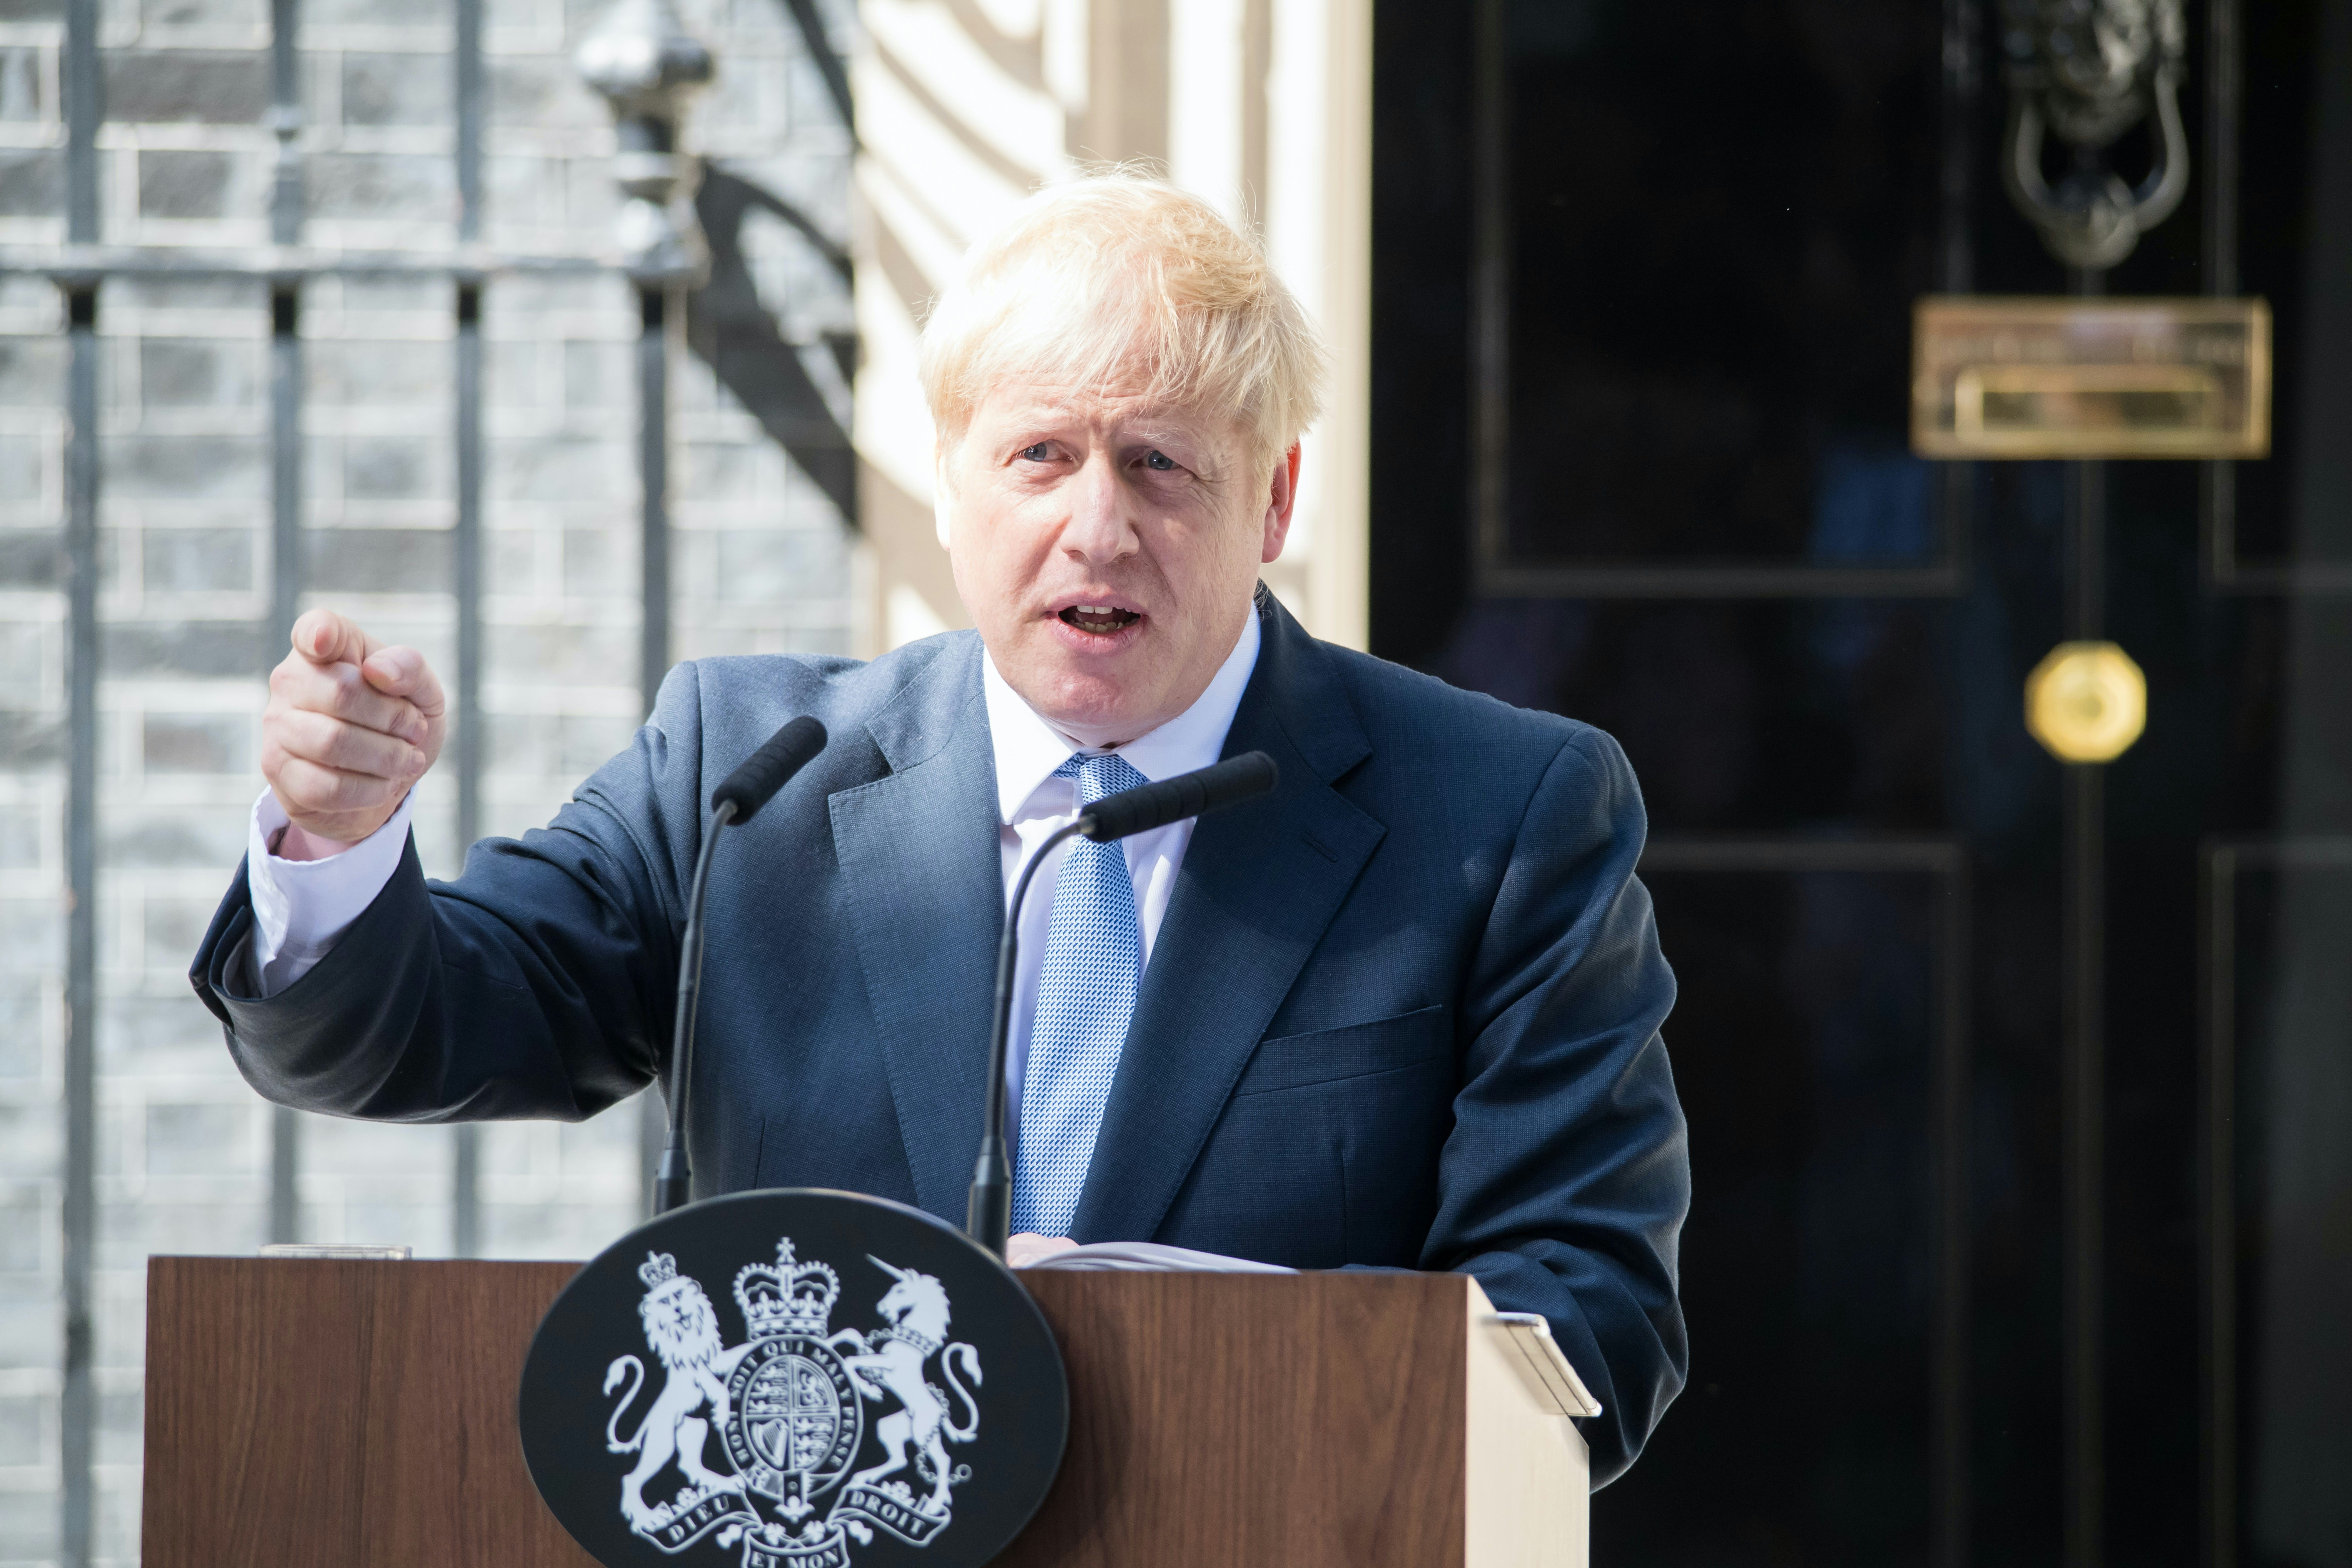 Prime Minister Boris Johnson held a news conference on the coronavirus outbreak in London on May 25, 2020. Shutterstock.